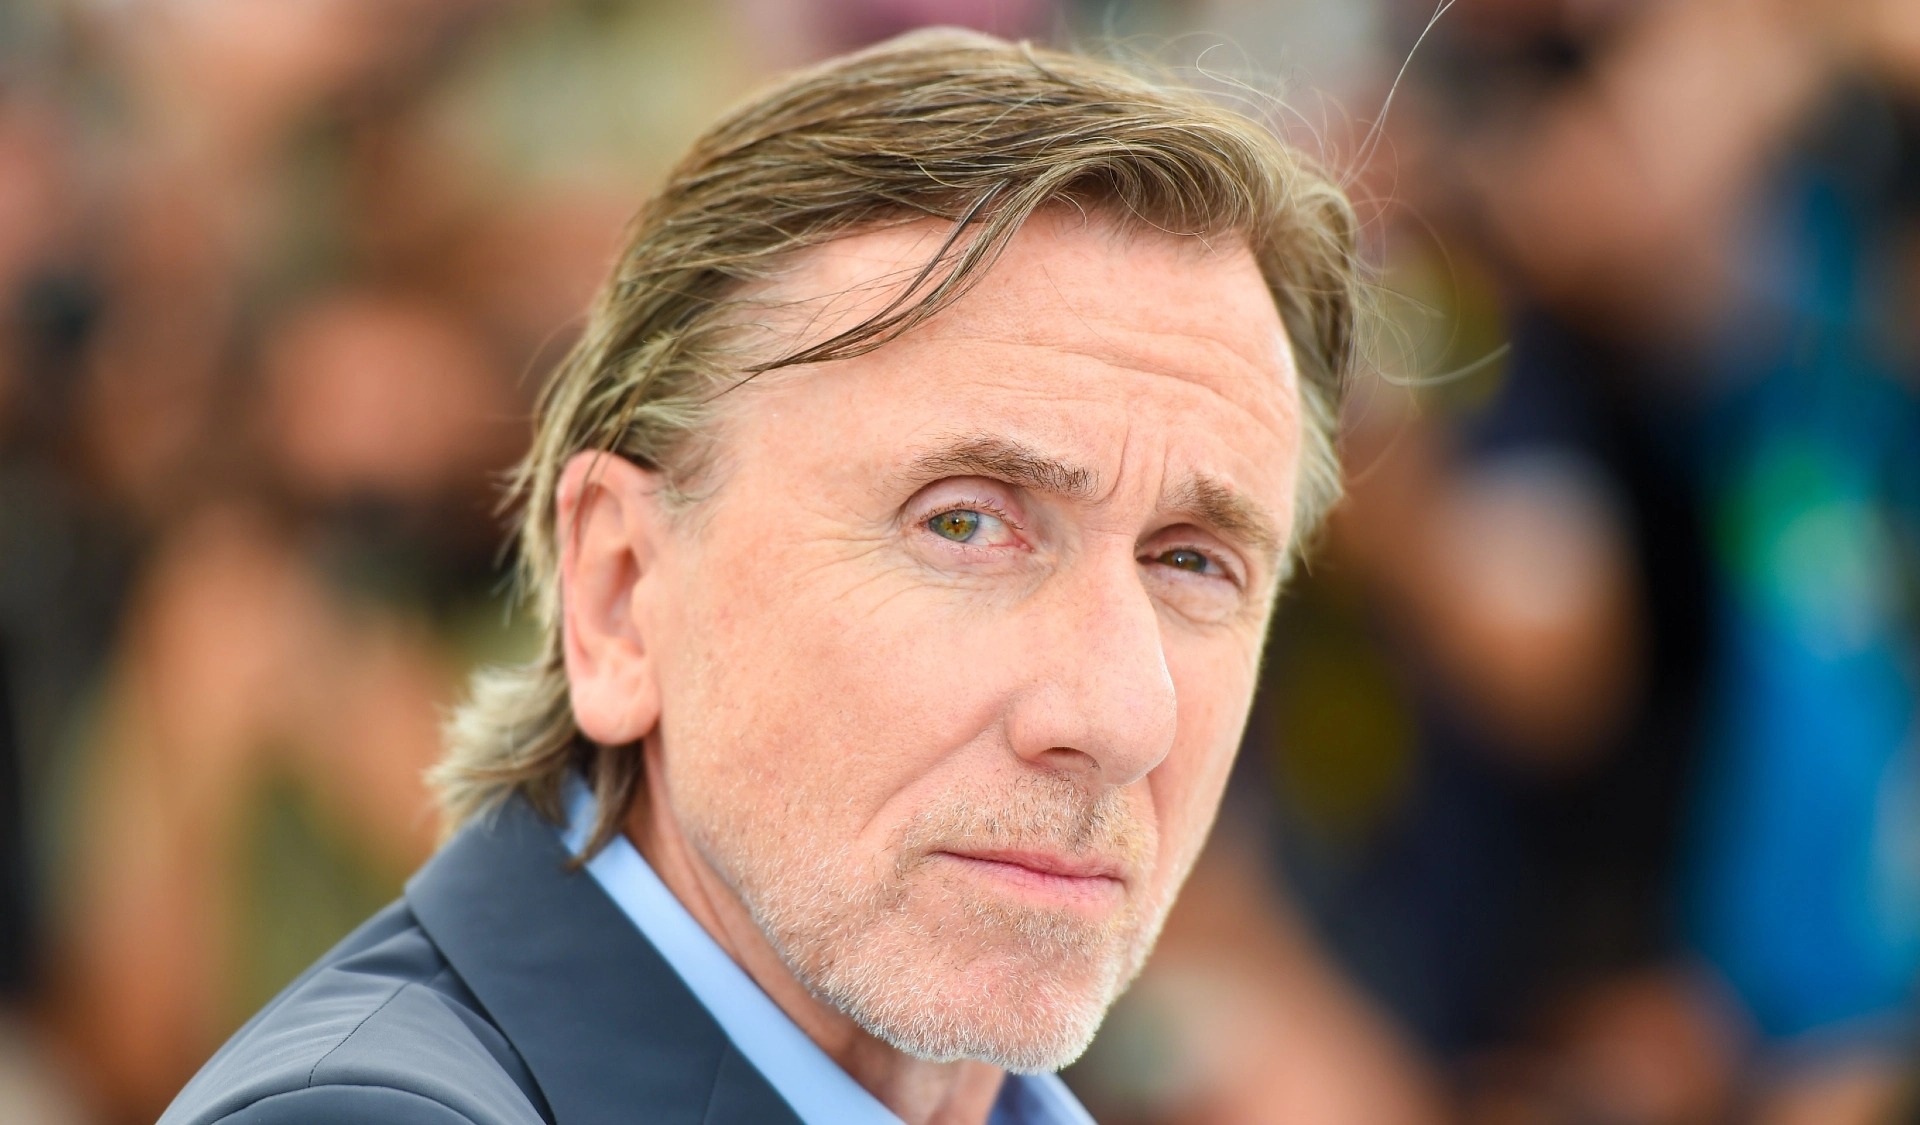 Tim Roth, a legendary actor, and his family are in our thoughts and prayers as they mourn their devastating loss.